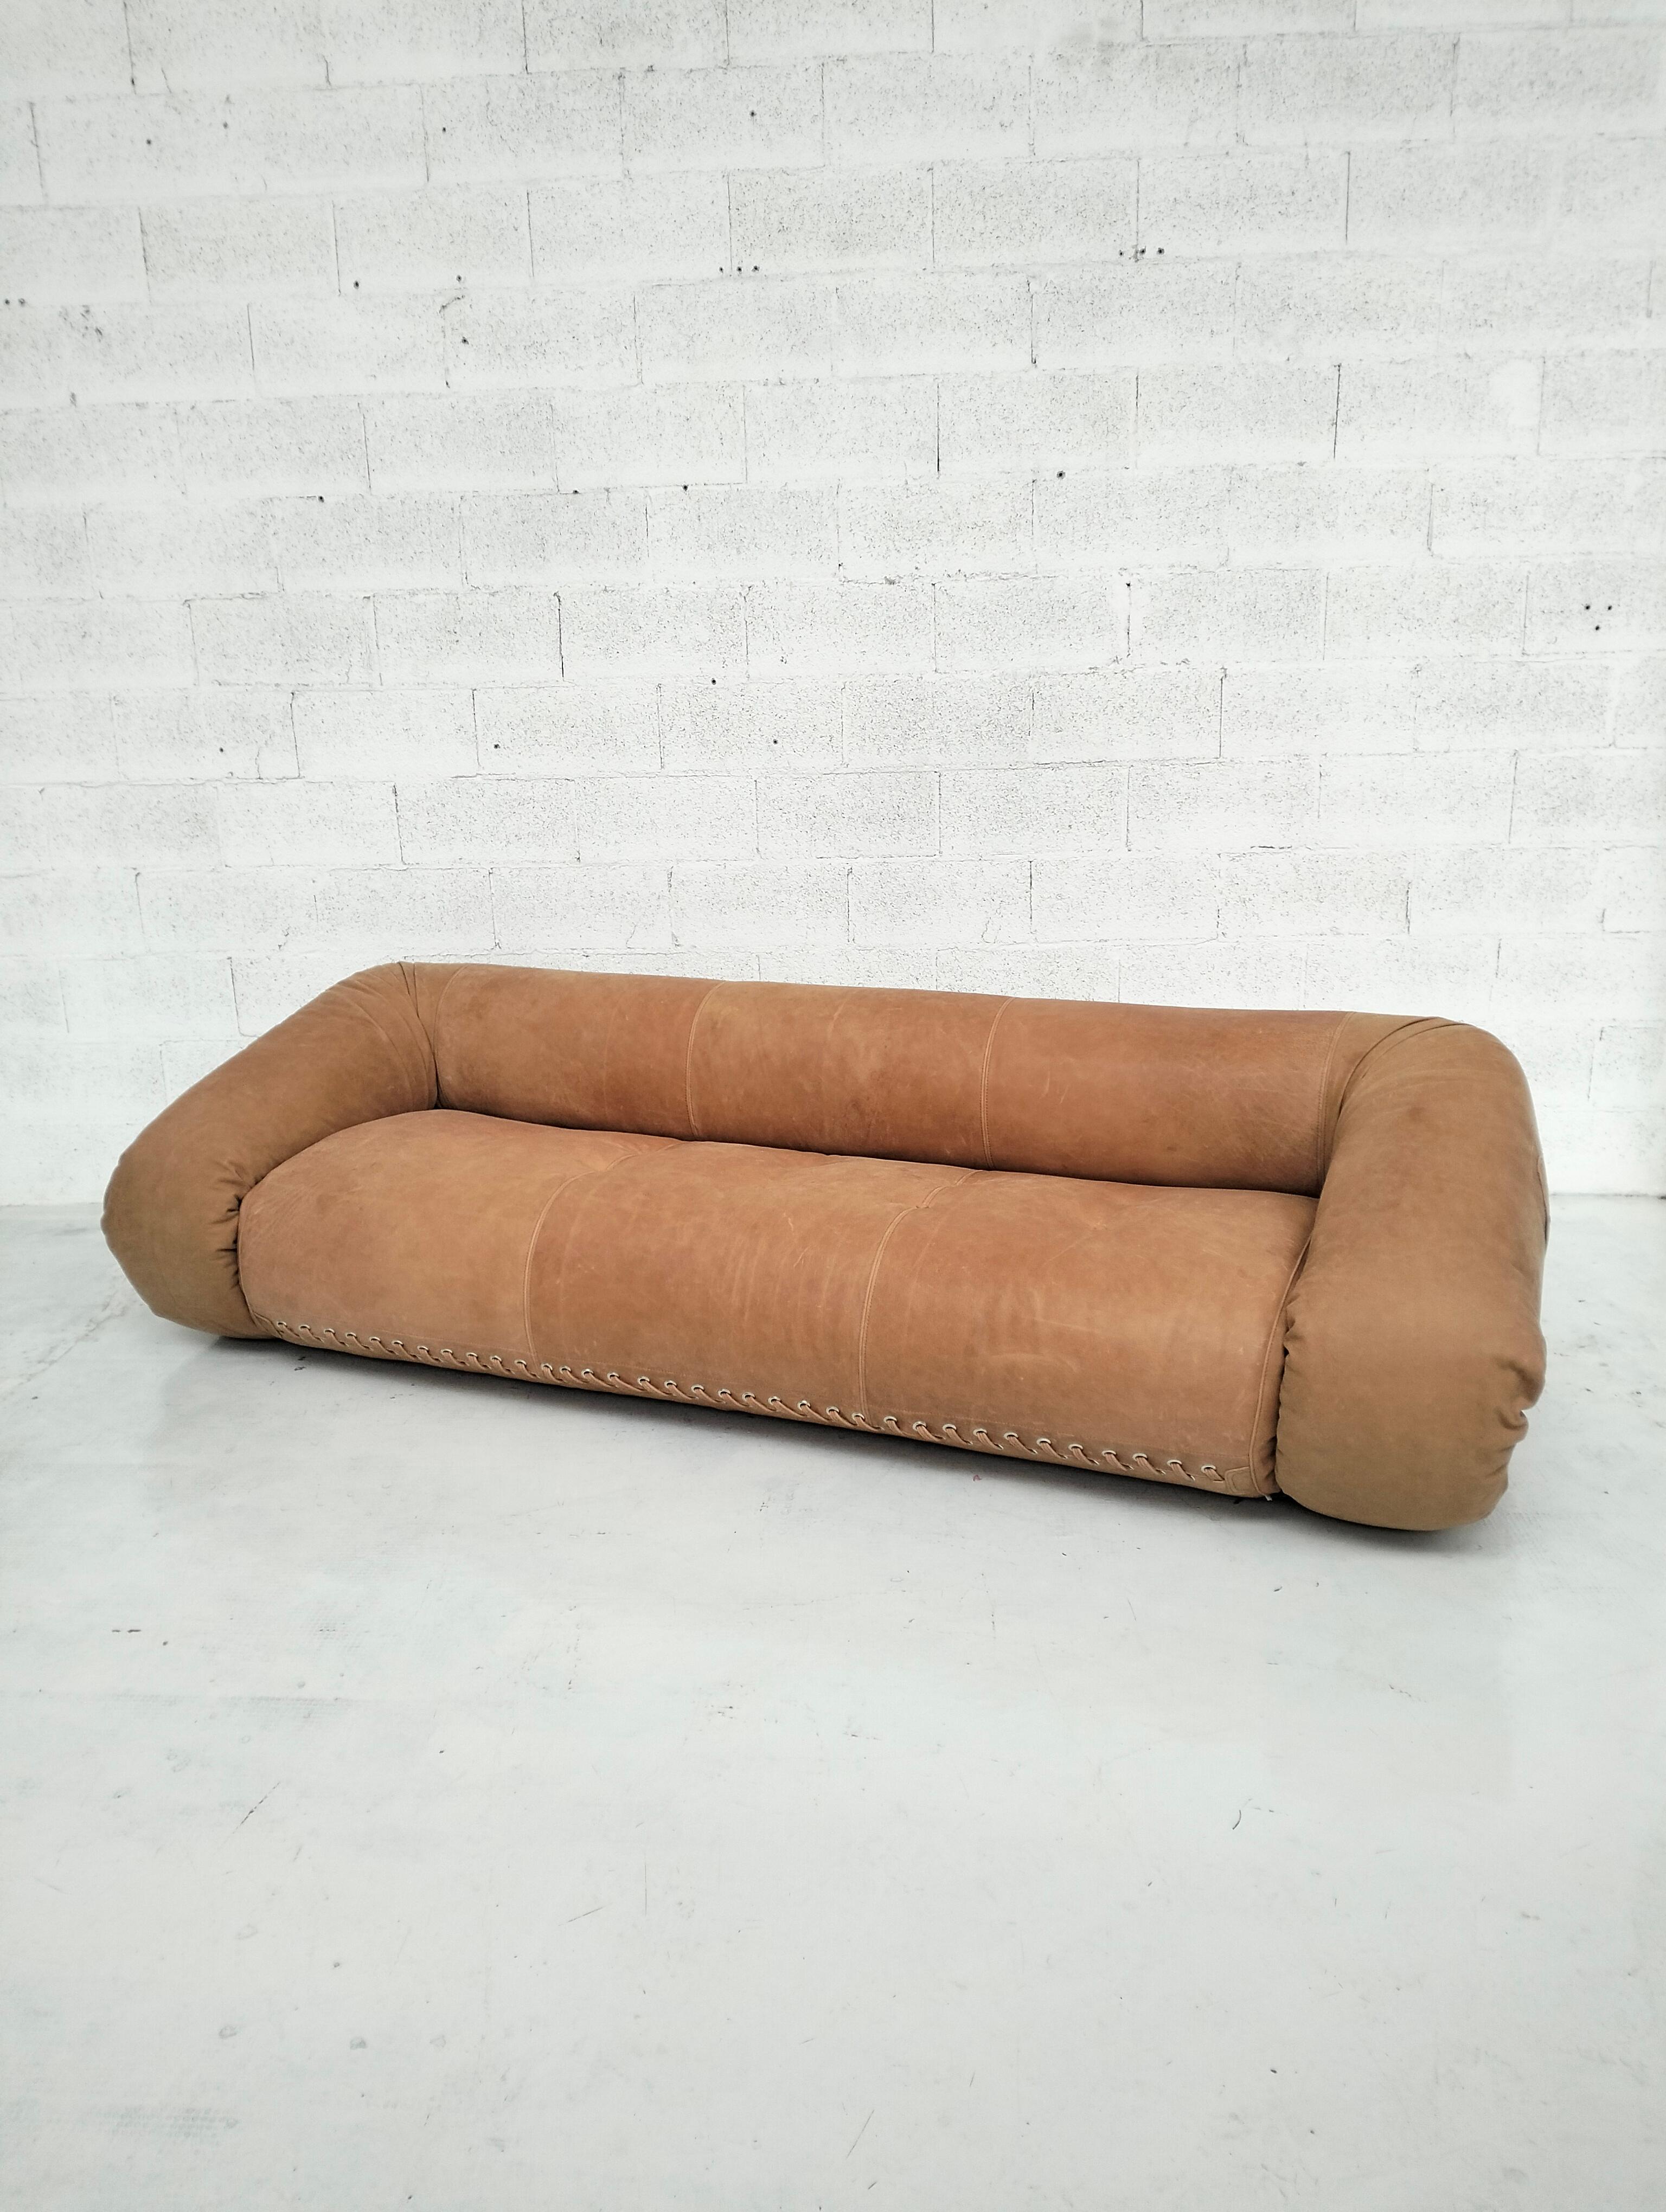 3 seater sofa, day bed Anfibio designed by Alessandro Becchi and produced by Giovannnetti in 1970s.
Designed in 1970, the Anfibio sofa bed has been described by critics around the world as a 